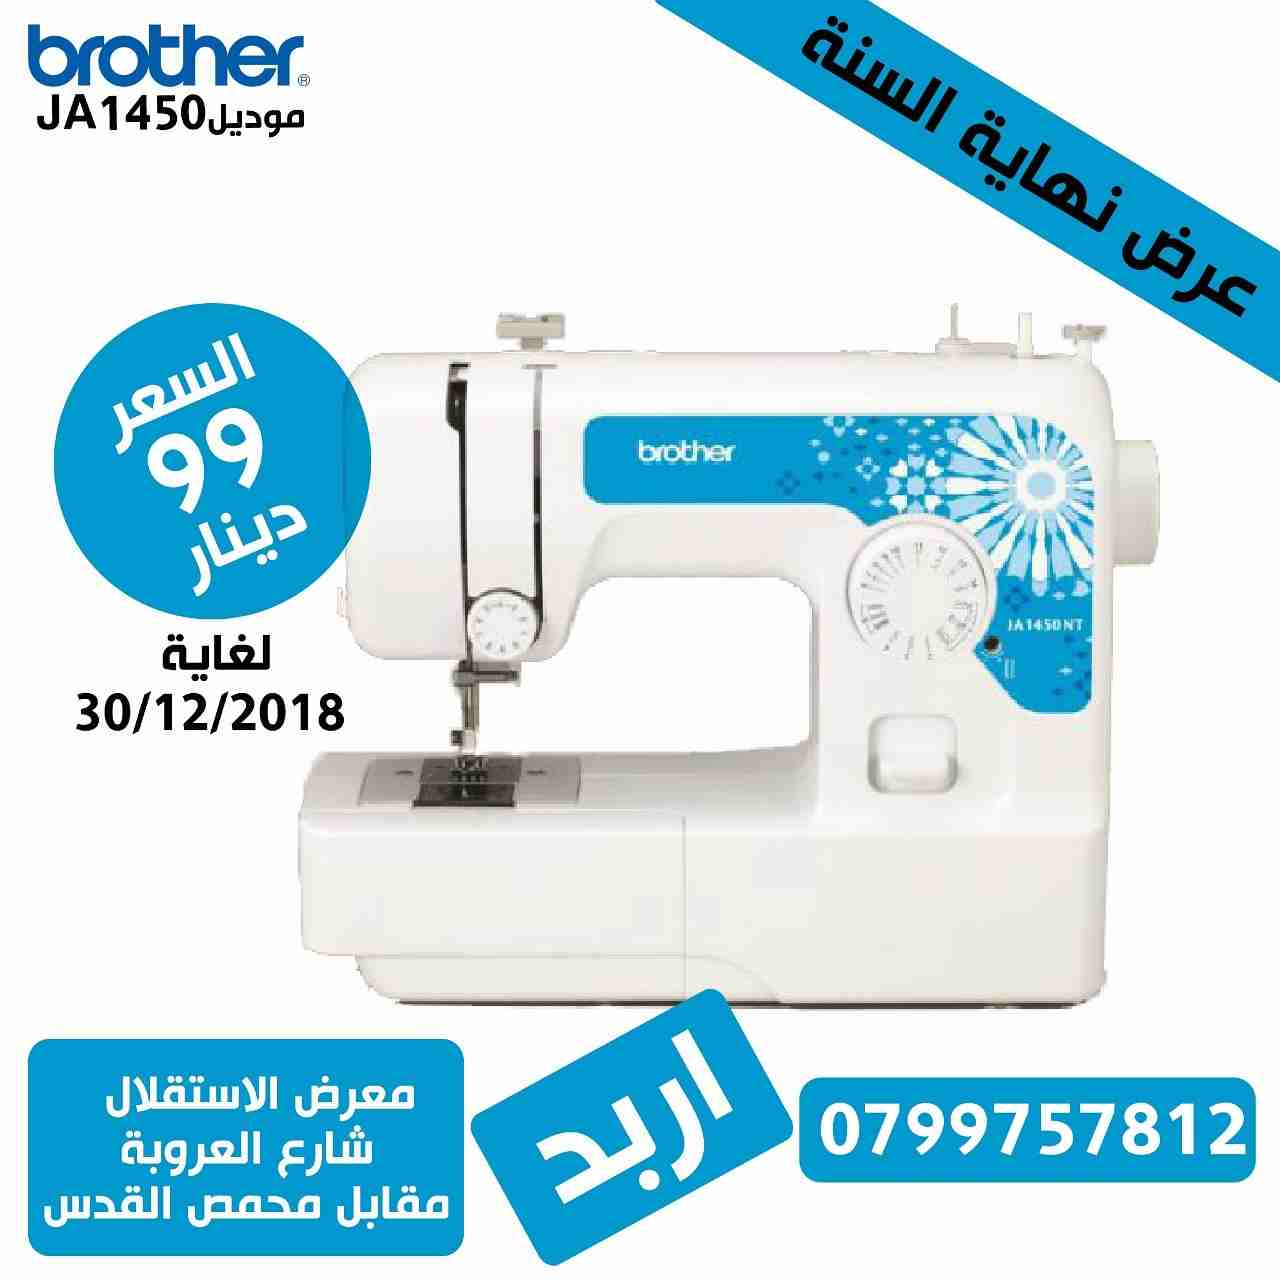 Assalaamu Alaikkum Brother,Sister All products are brand new, unlocked sealed in box comes with 1 year international warranty and also 6 months return policy - -  ماكة الخياطه والتطريز من...